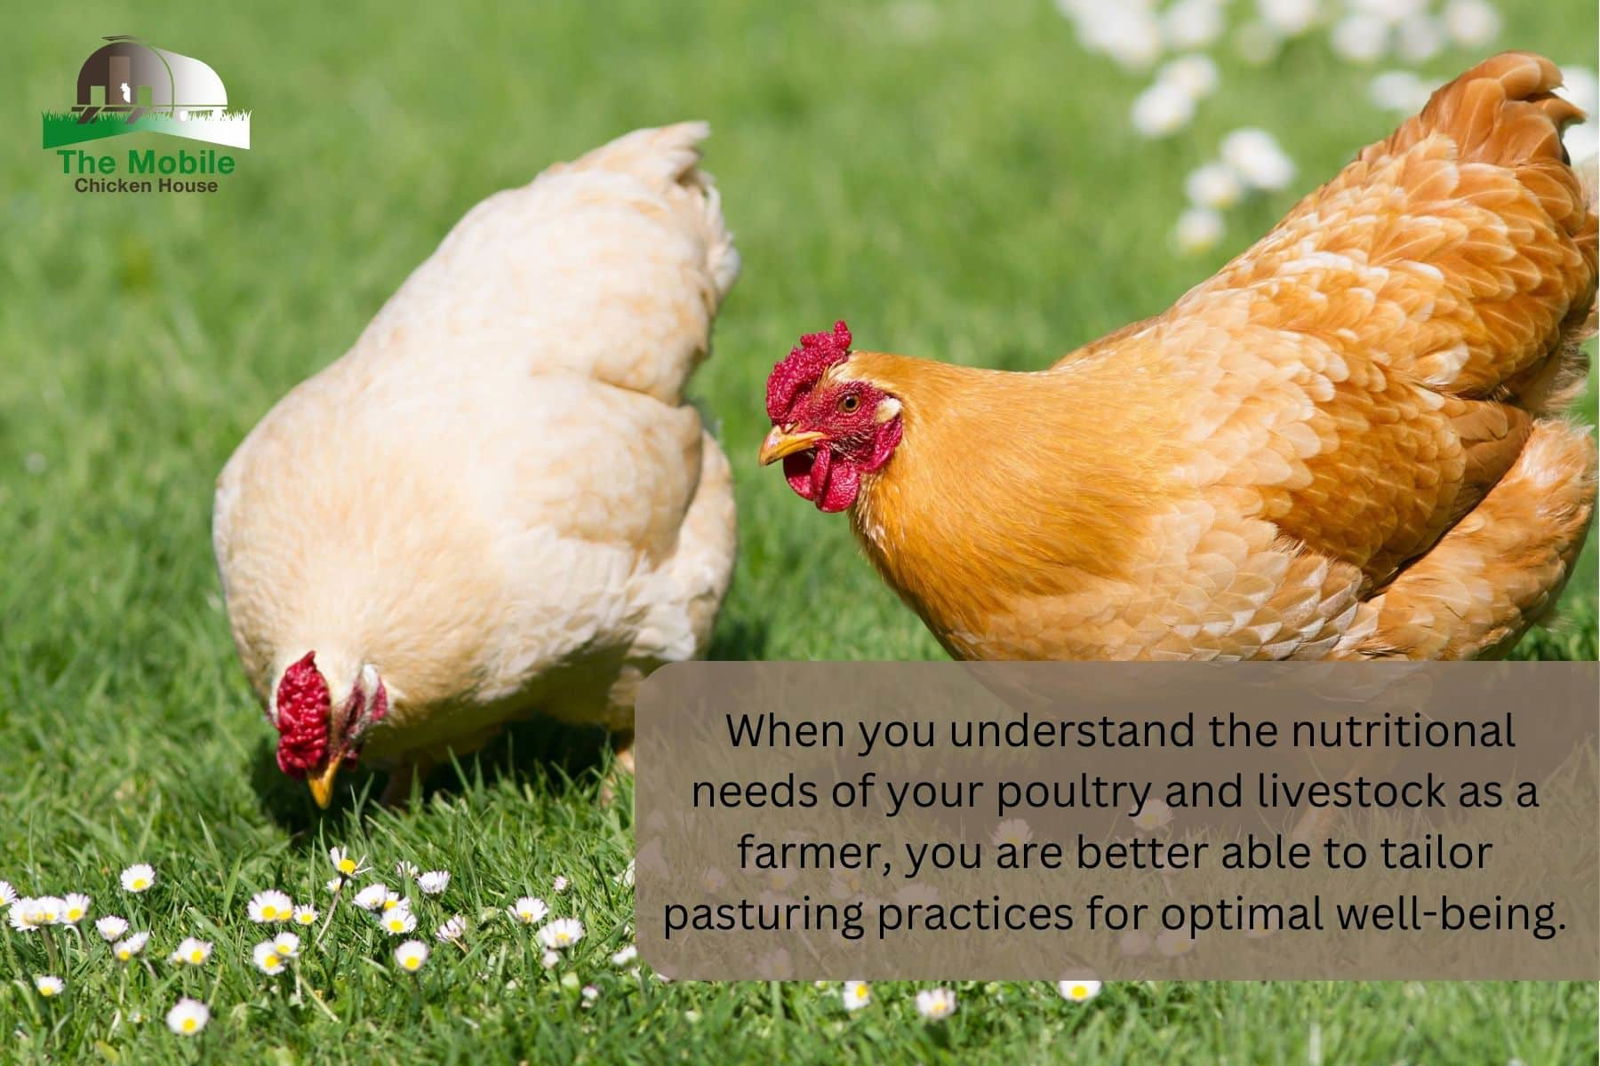 nutritional needs of your poultry and livestock